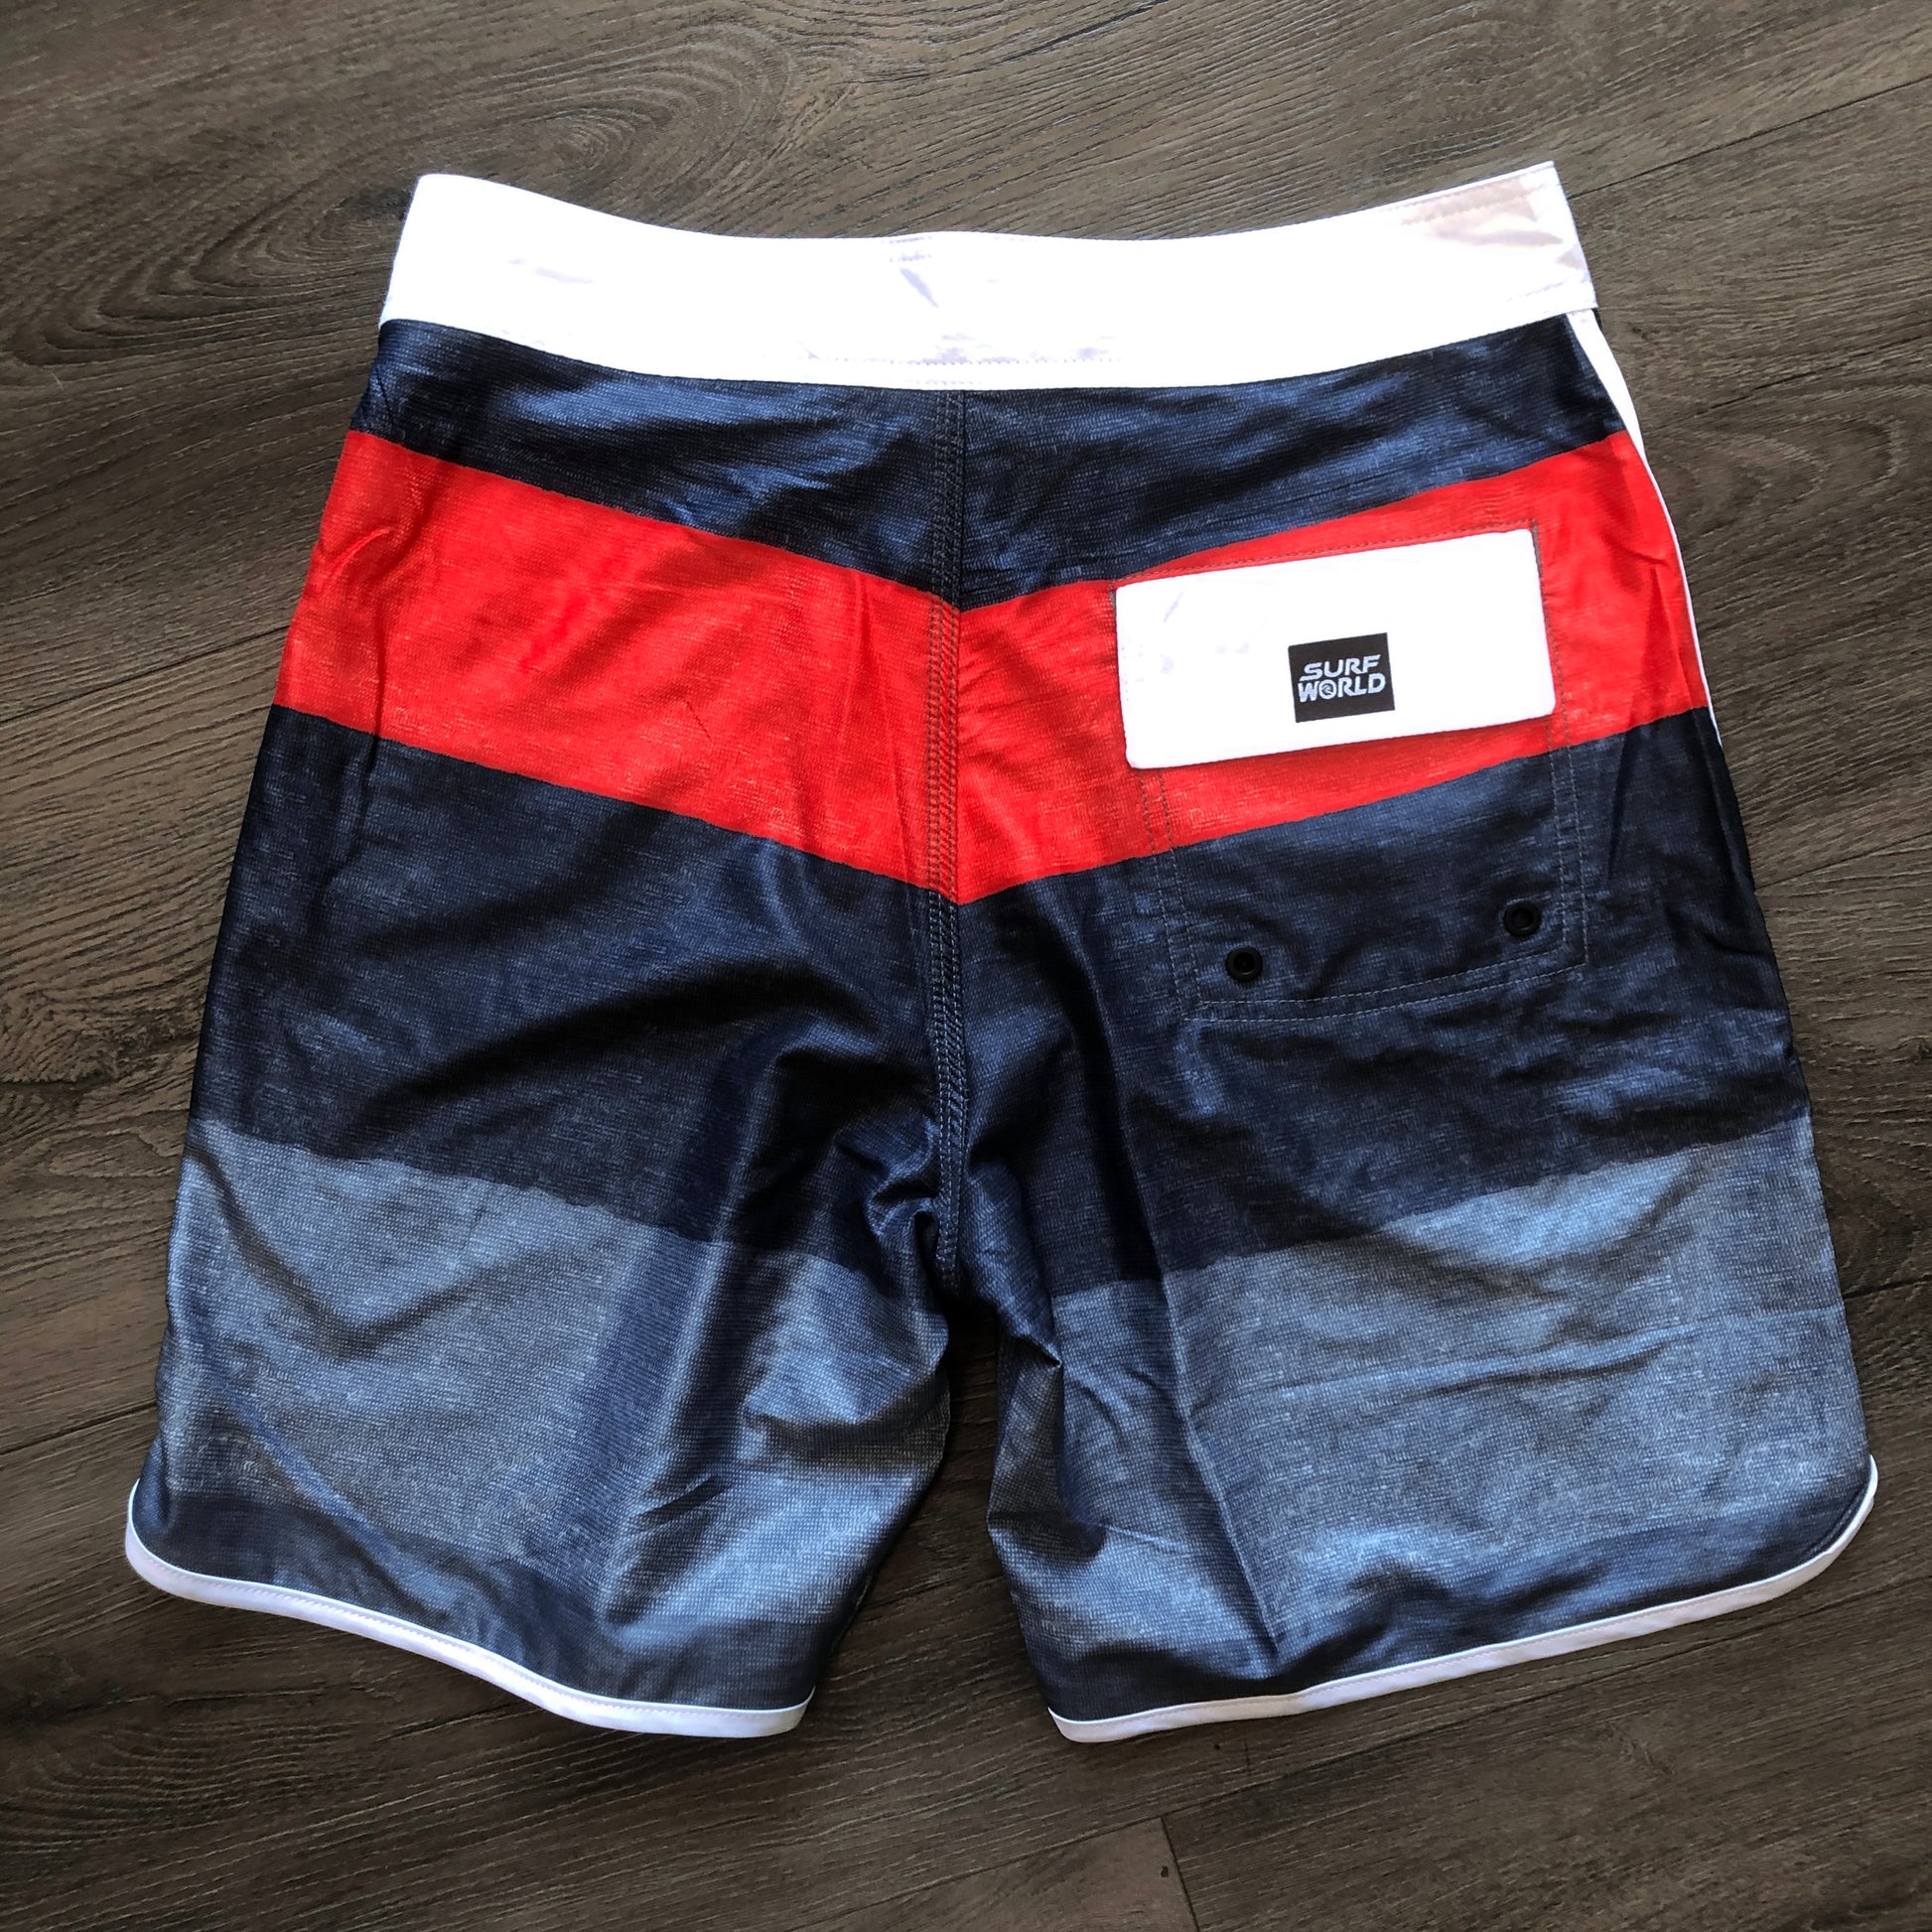 Surf World Ocean Mile Boardshorts - The Surf World Collection - Navy Teal Mens Boardshorts